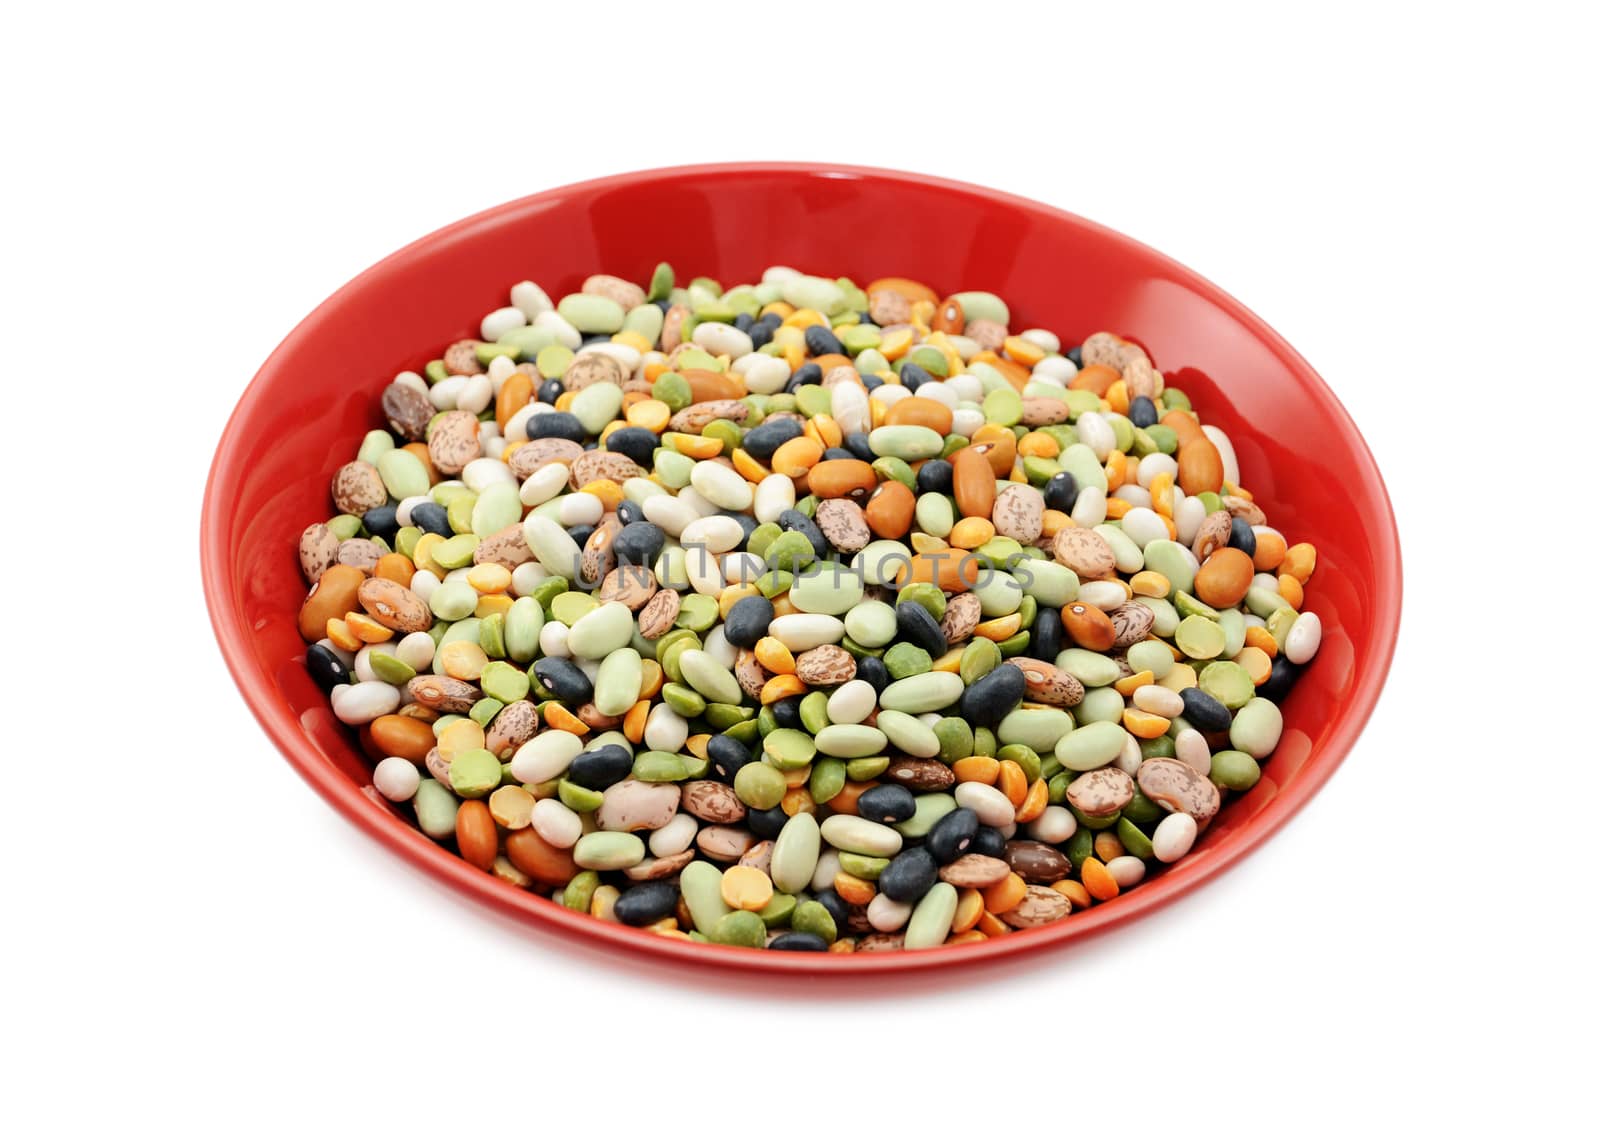 Mixed dried beans and peas in a deep red china bowl, on a white background